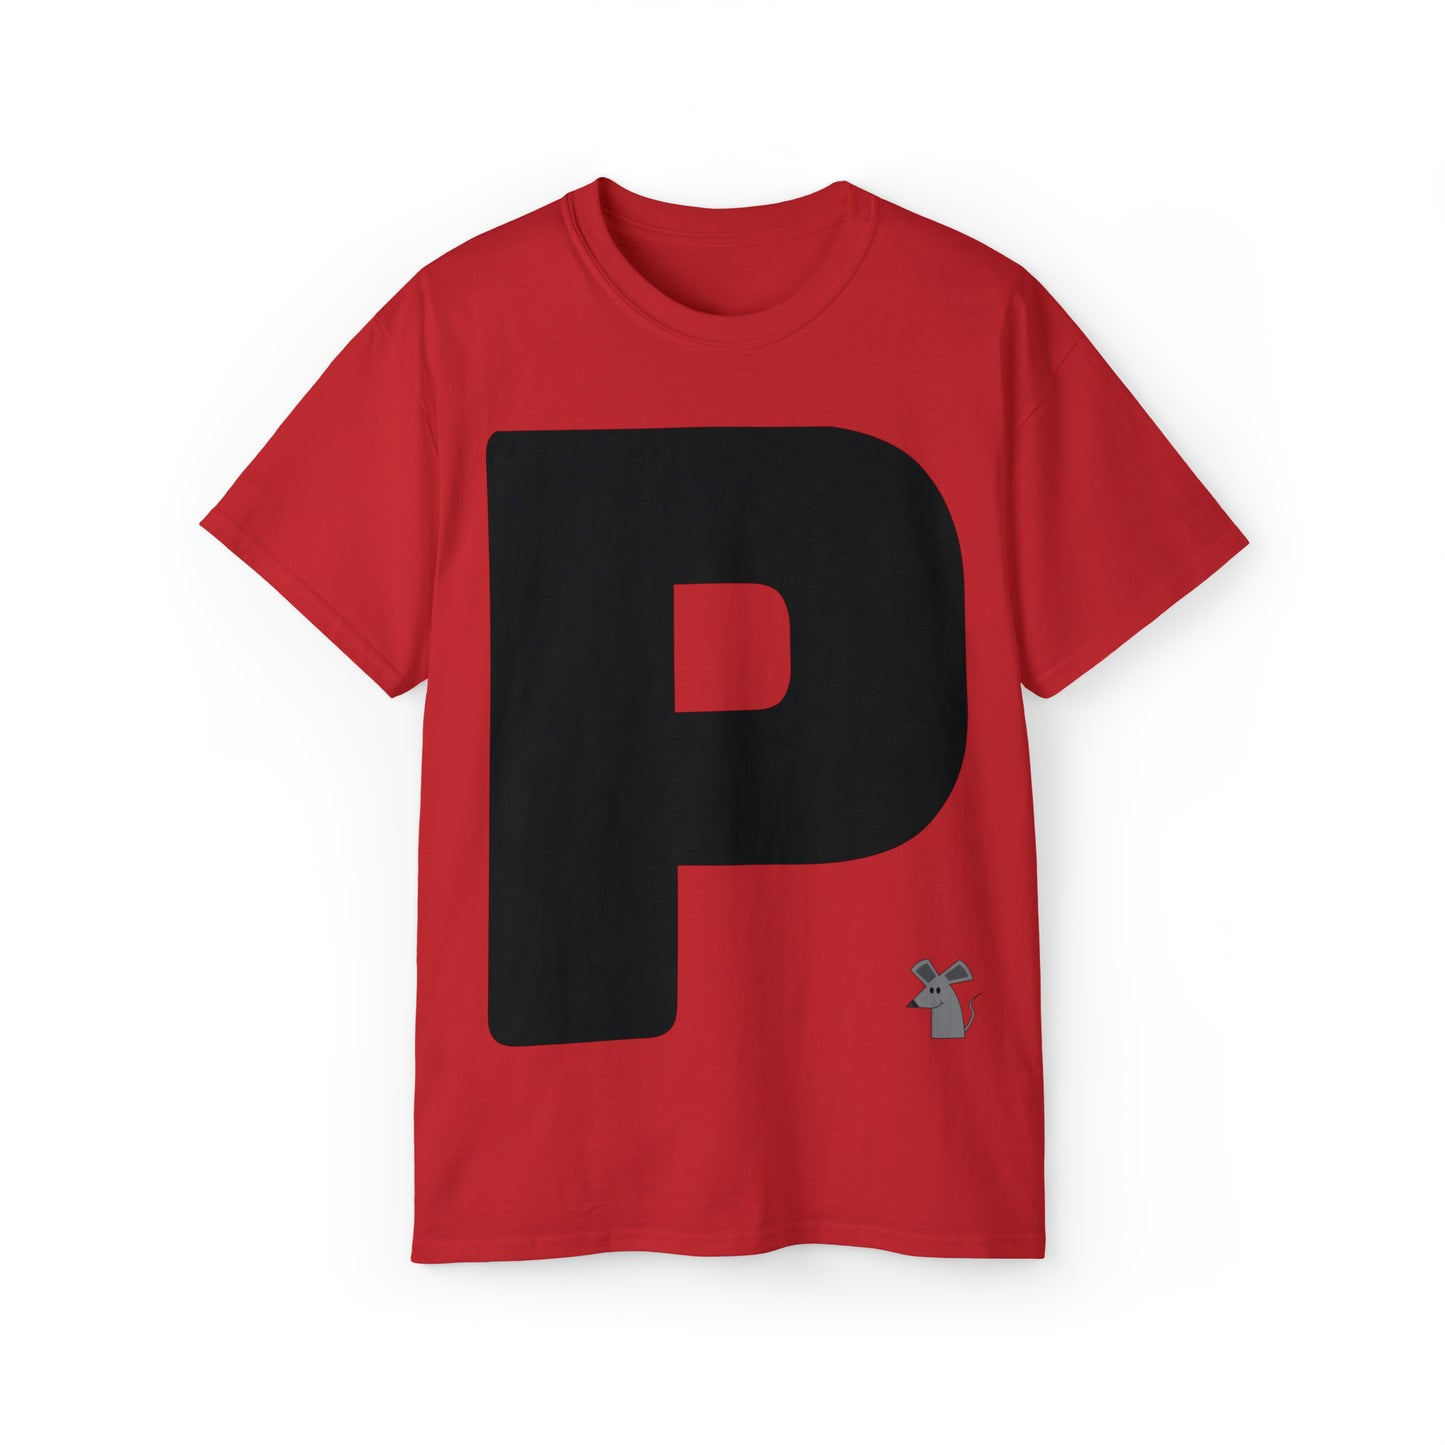 P and mouse T-Shirt